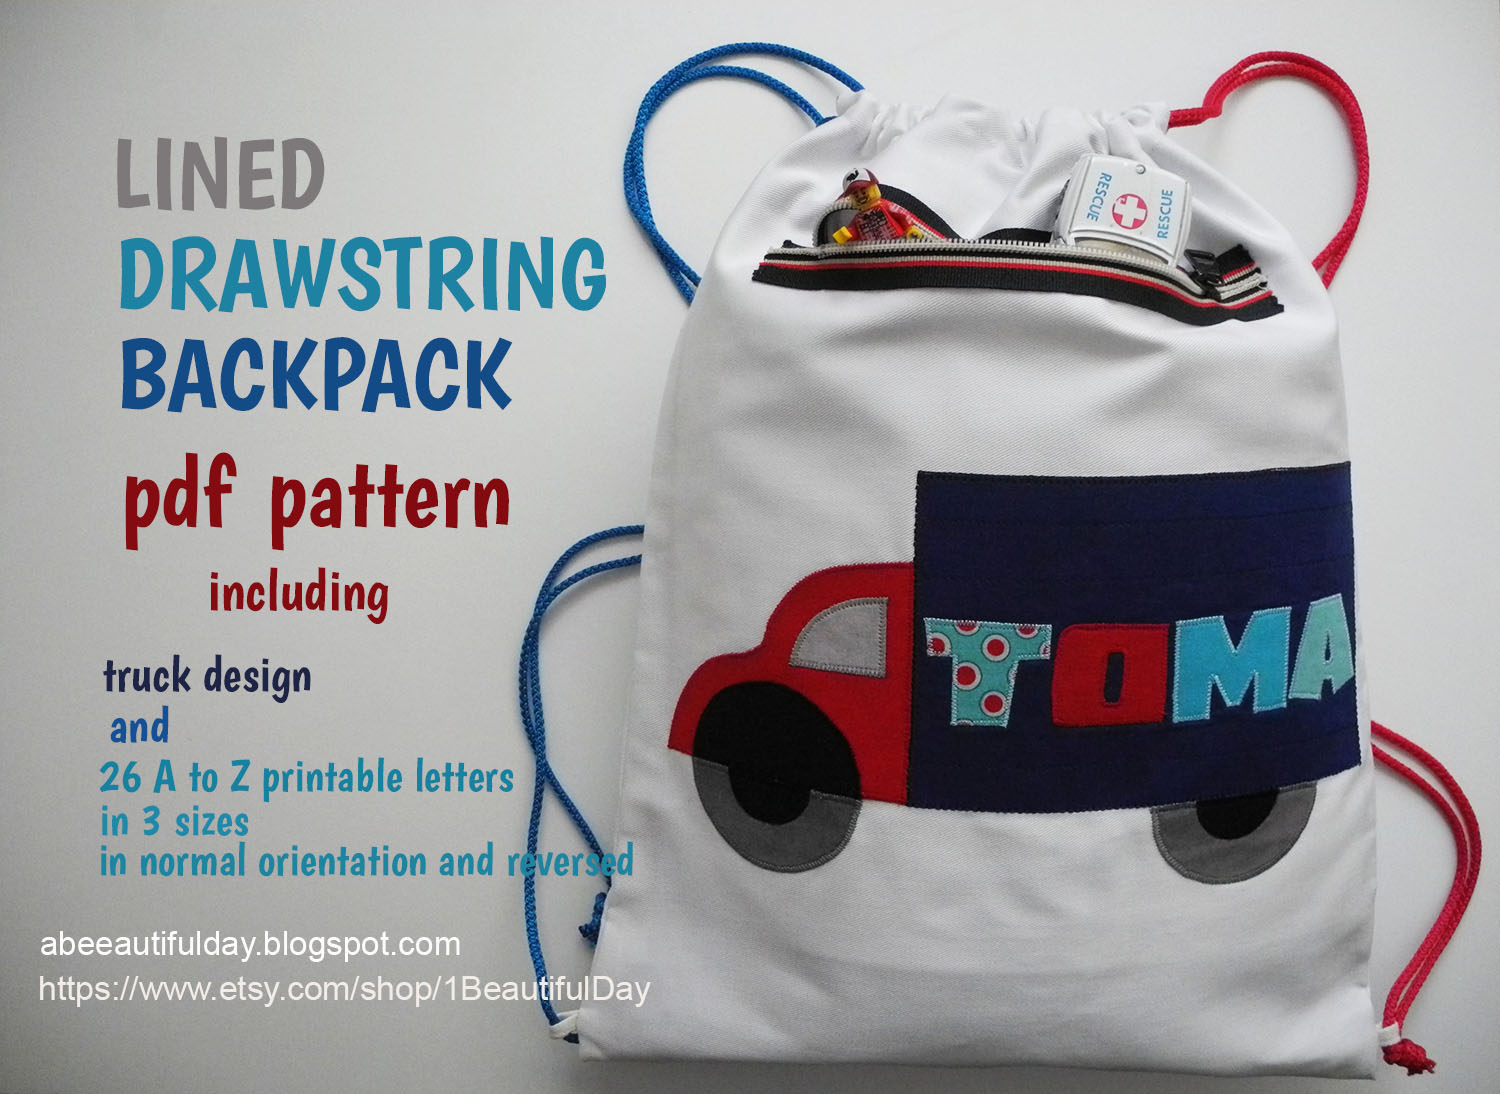 a-beautiful-day-lined-drawstring-backpack-pattern-is-here